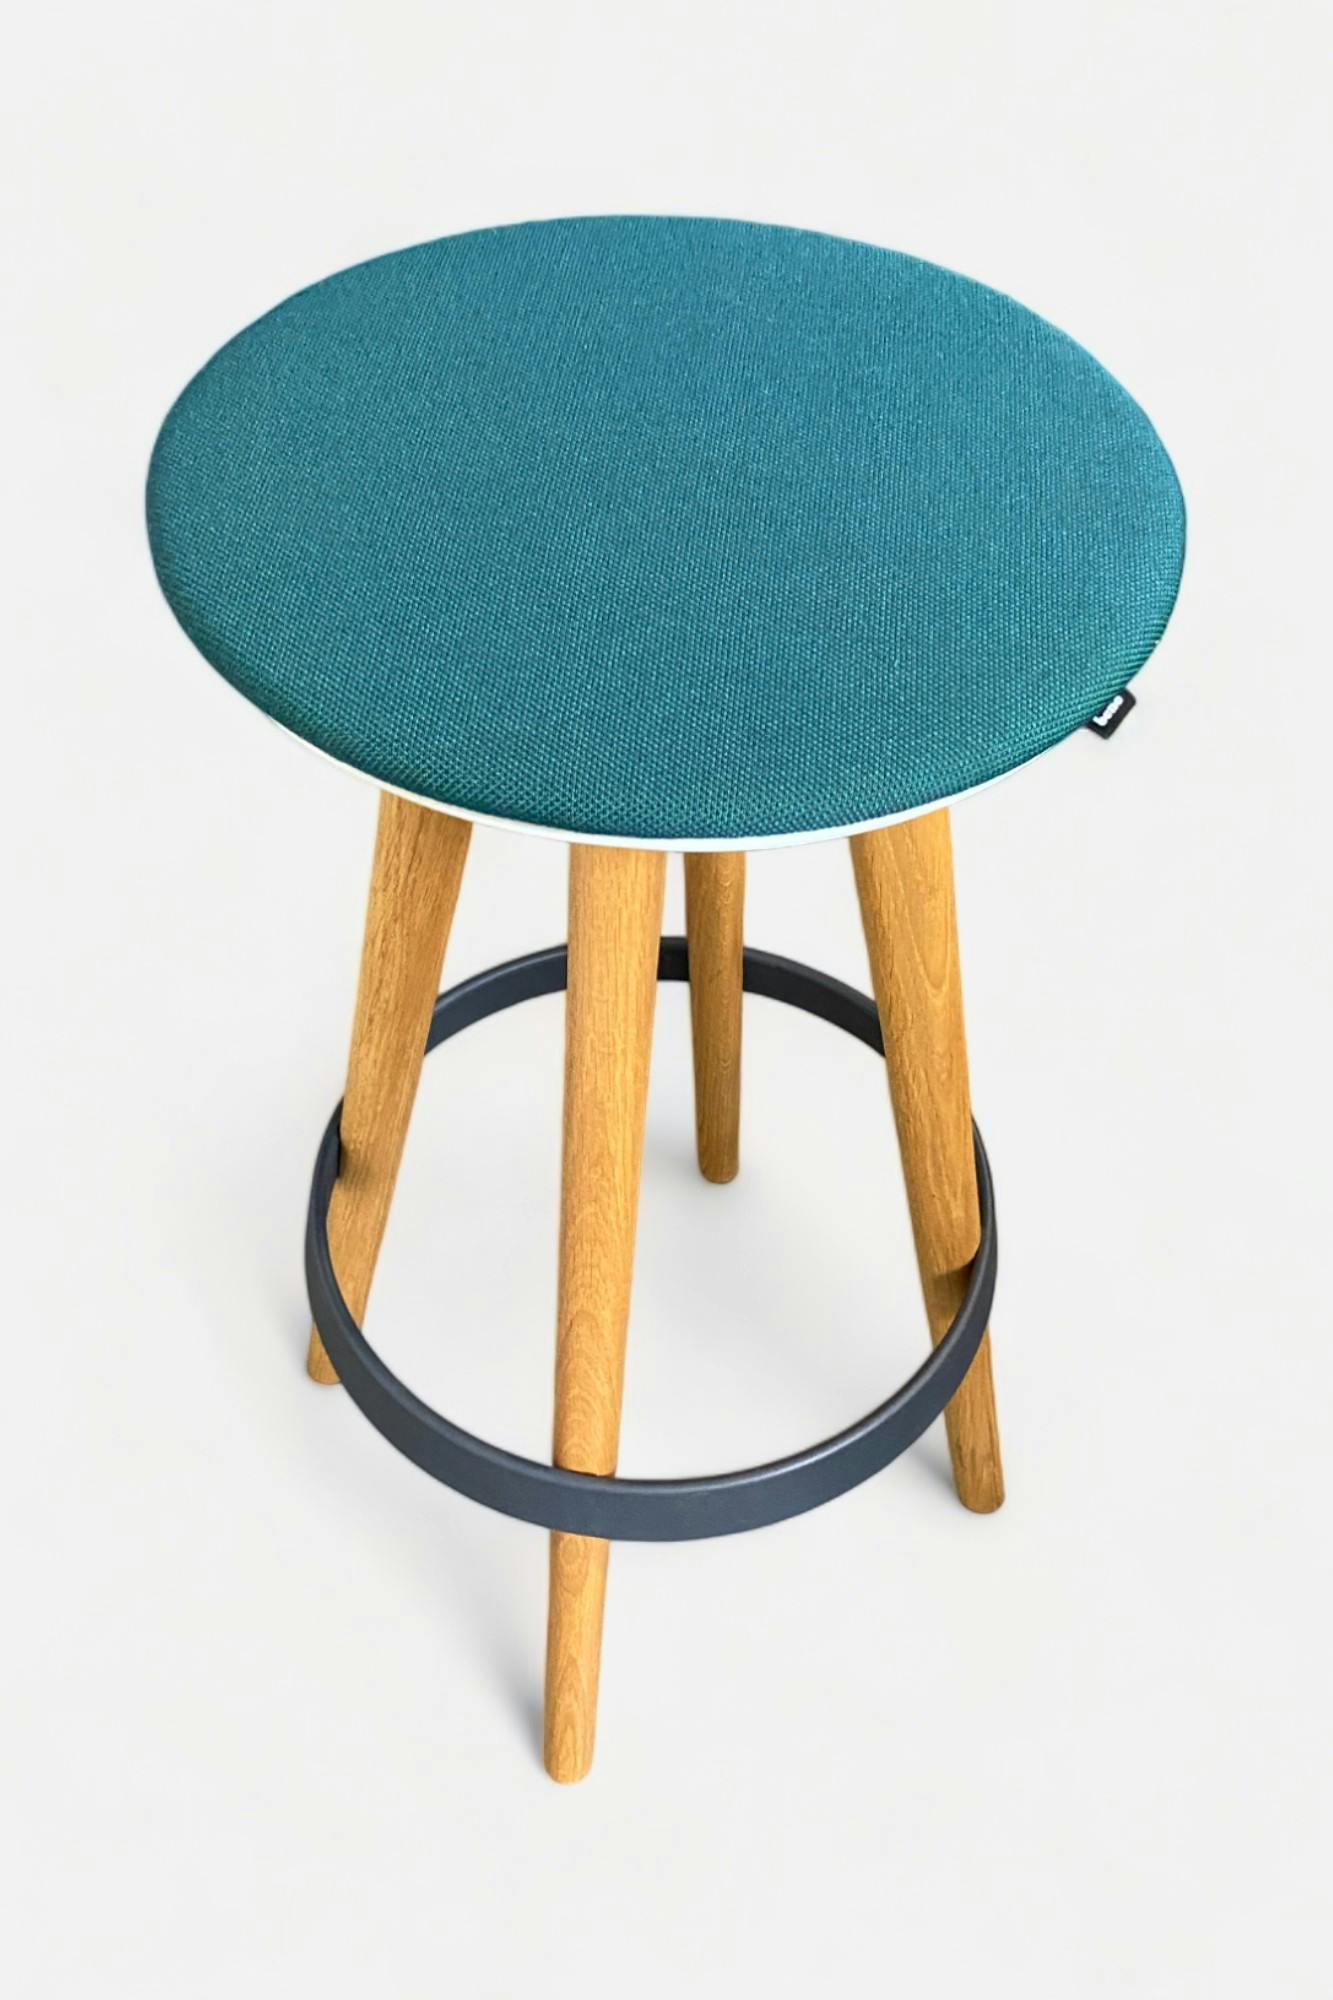 Bene Timba blue green high stool on wood legs - Relieve Furniture